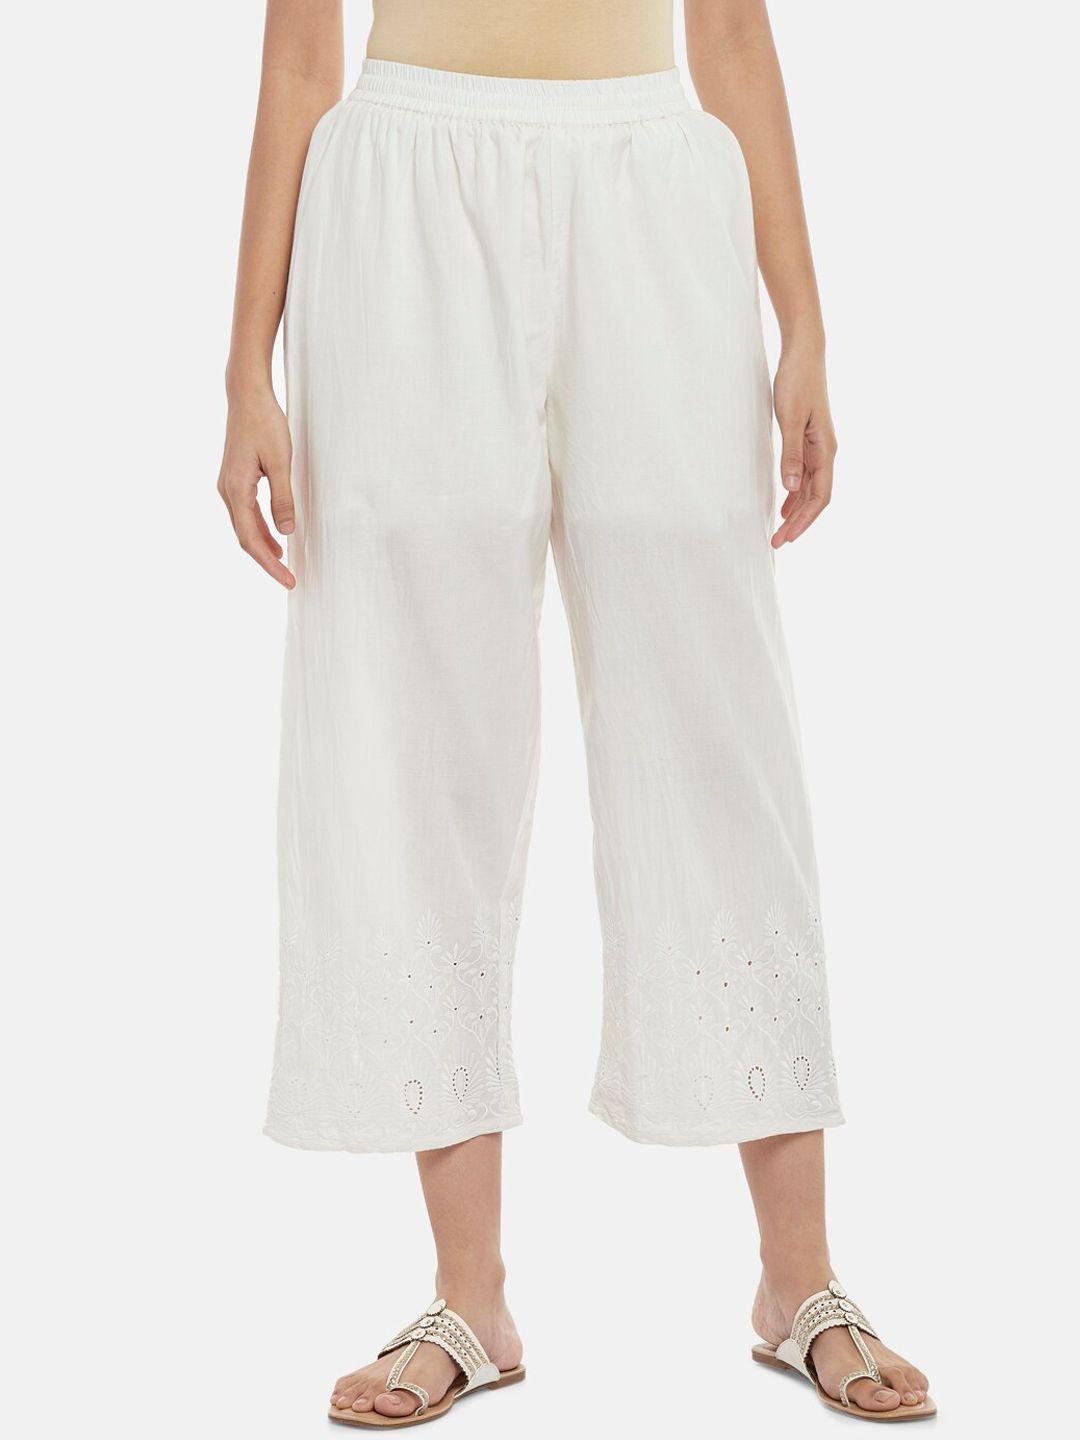 rangmanch-by-pantaloons-women-off-white-embroidered-culottes-trouser